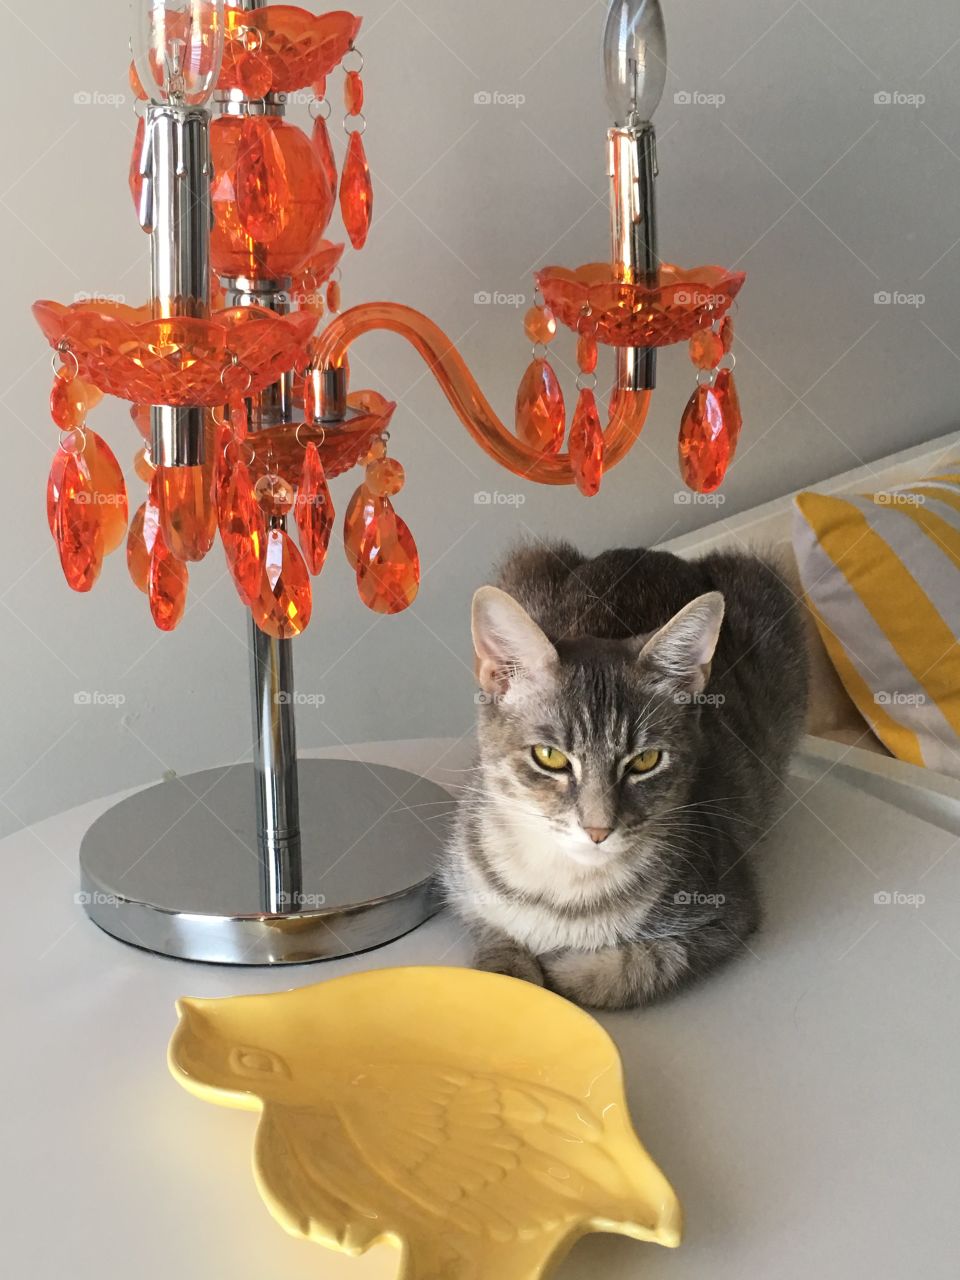 Sitting Cat with the Orange Chandelier